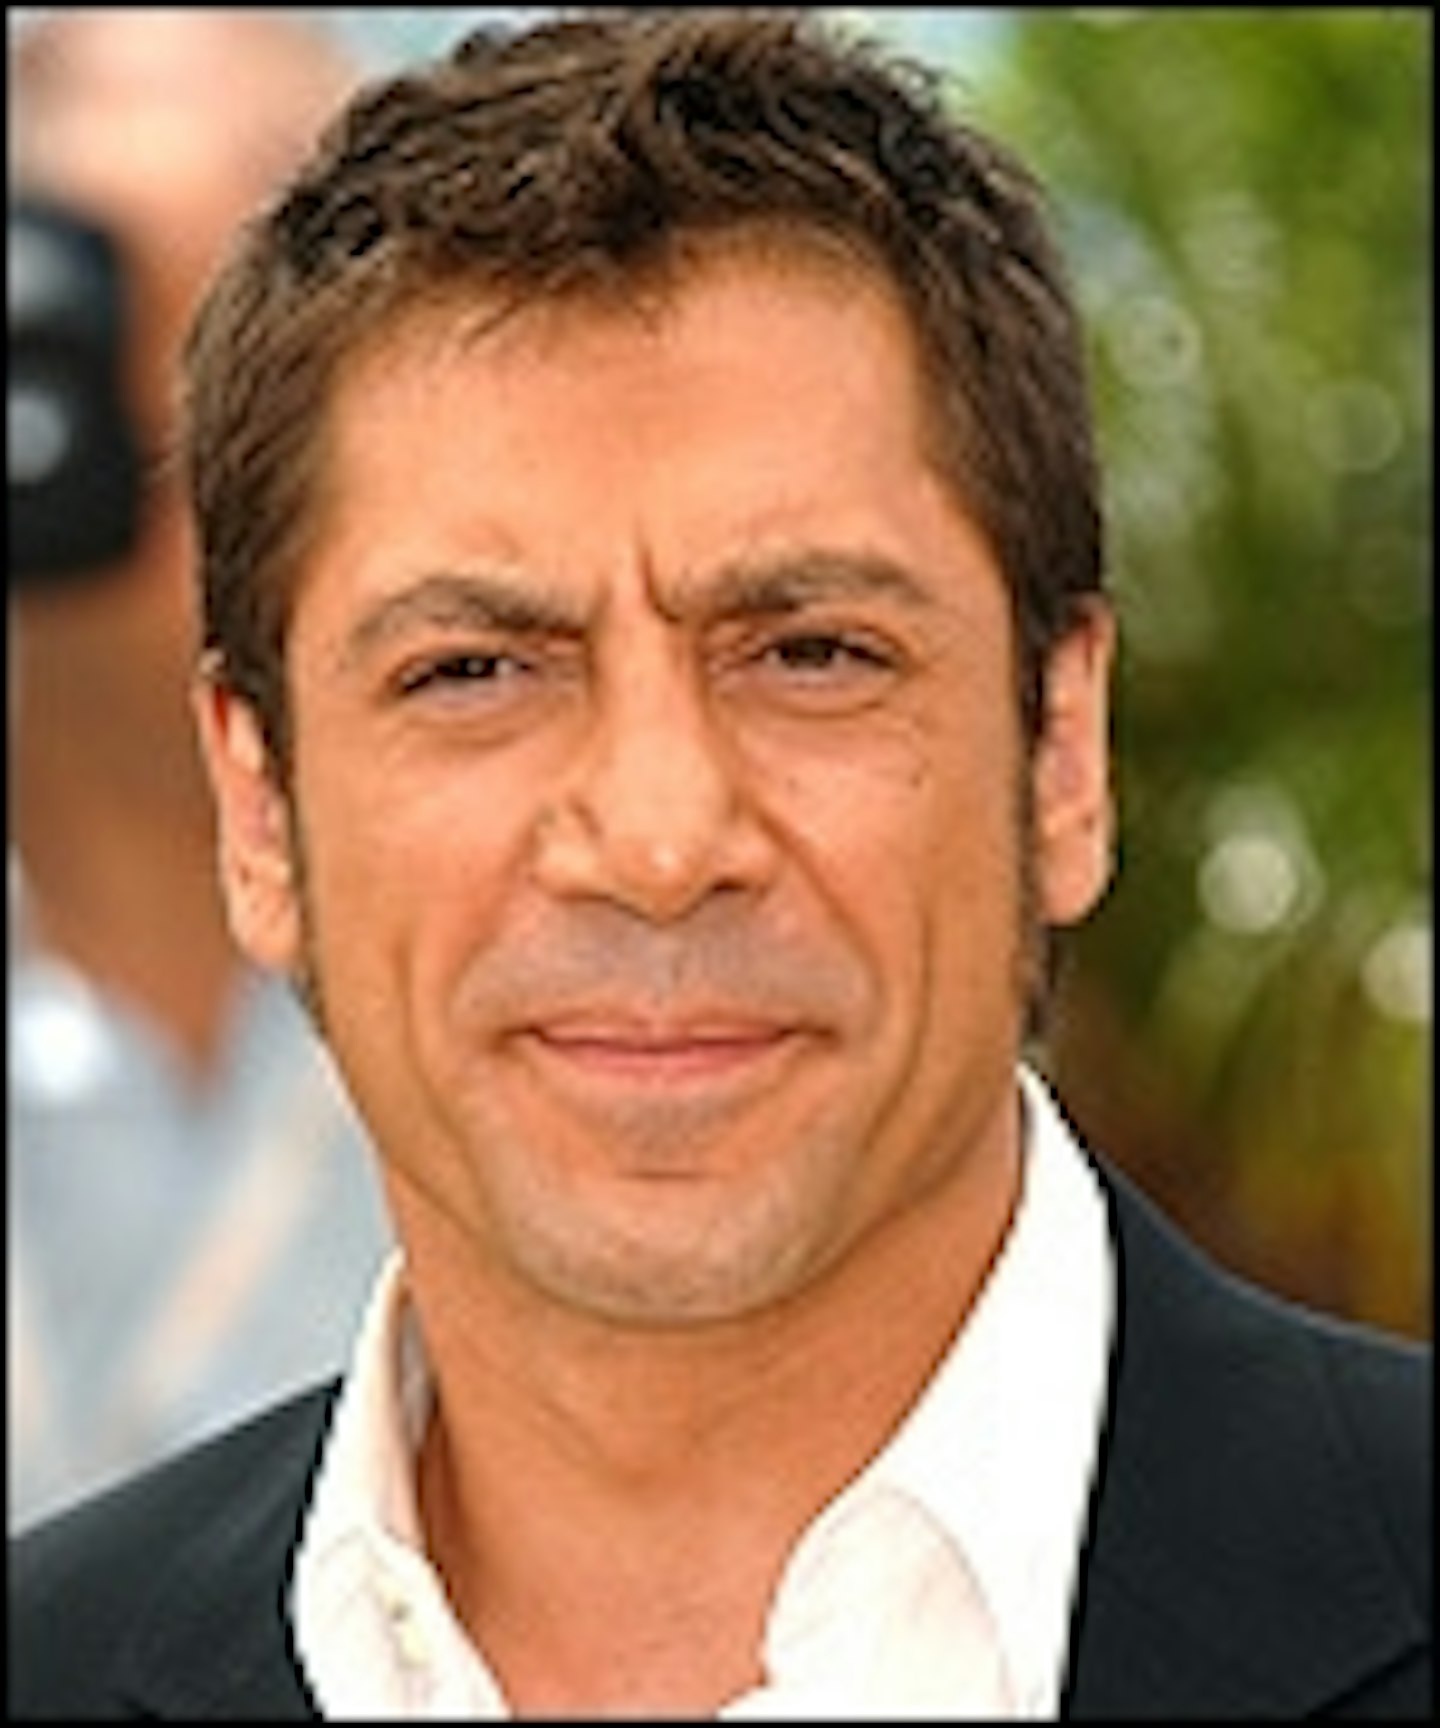 Javier Bardem Confirmed For Pirates Of The Caribbean: Dead Men Tell No Tales